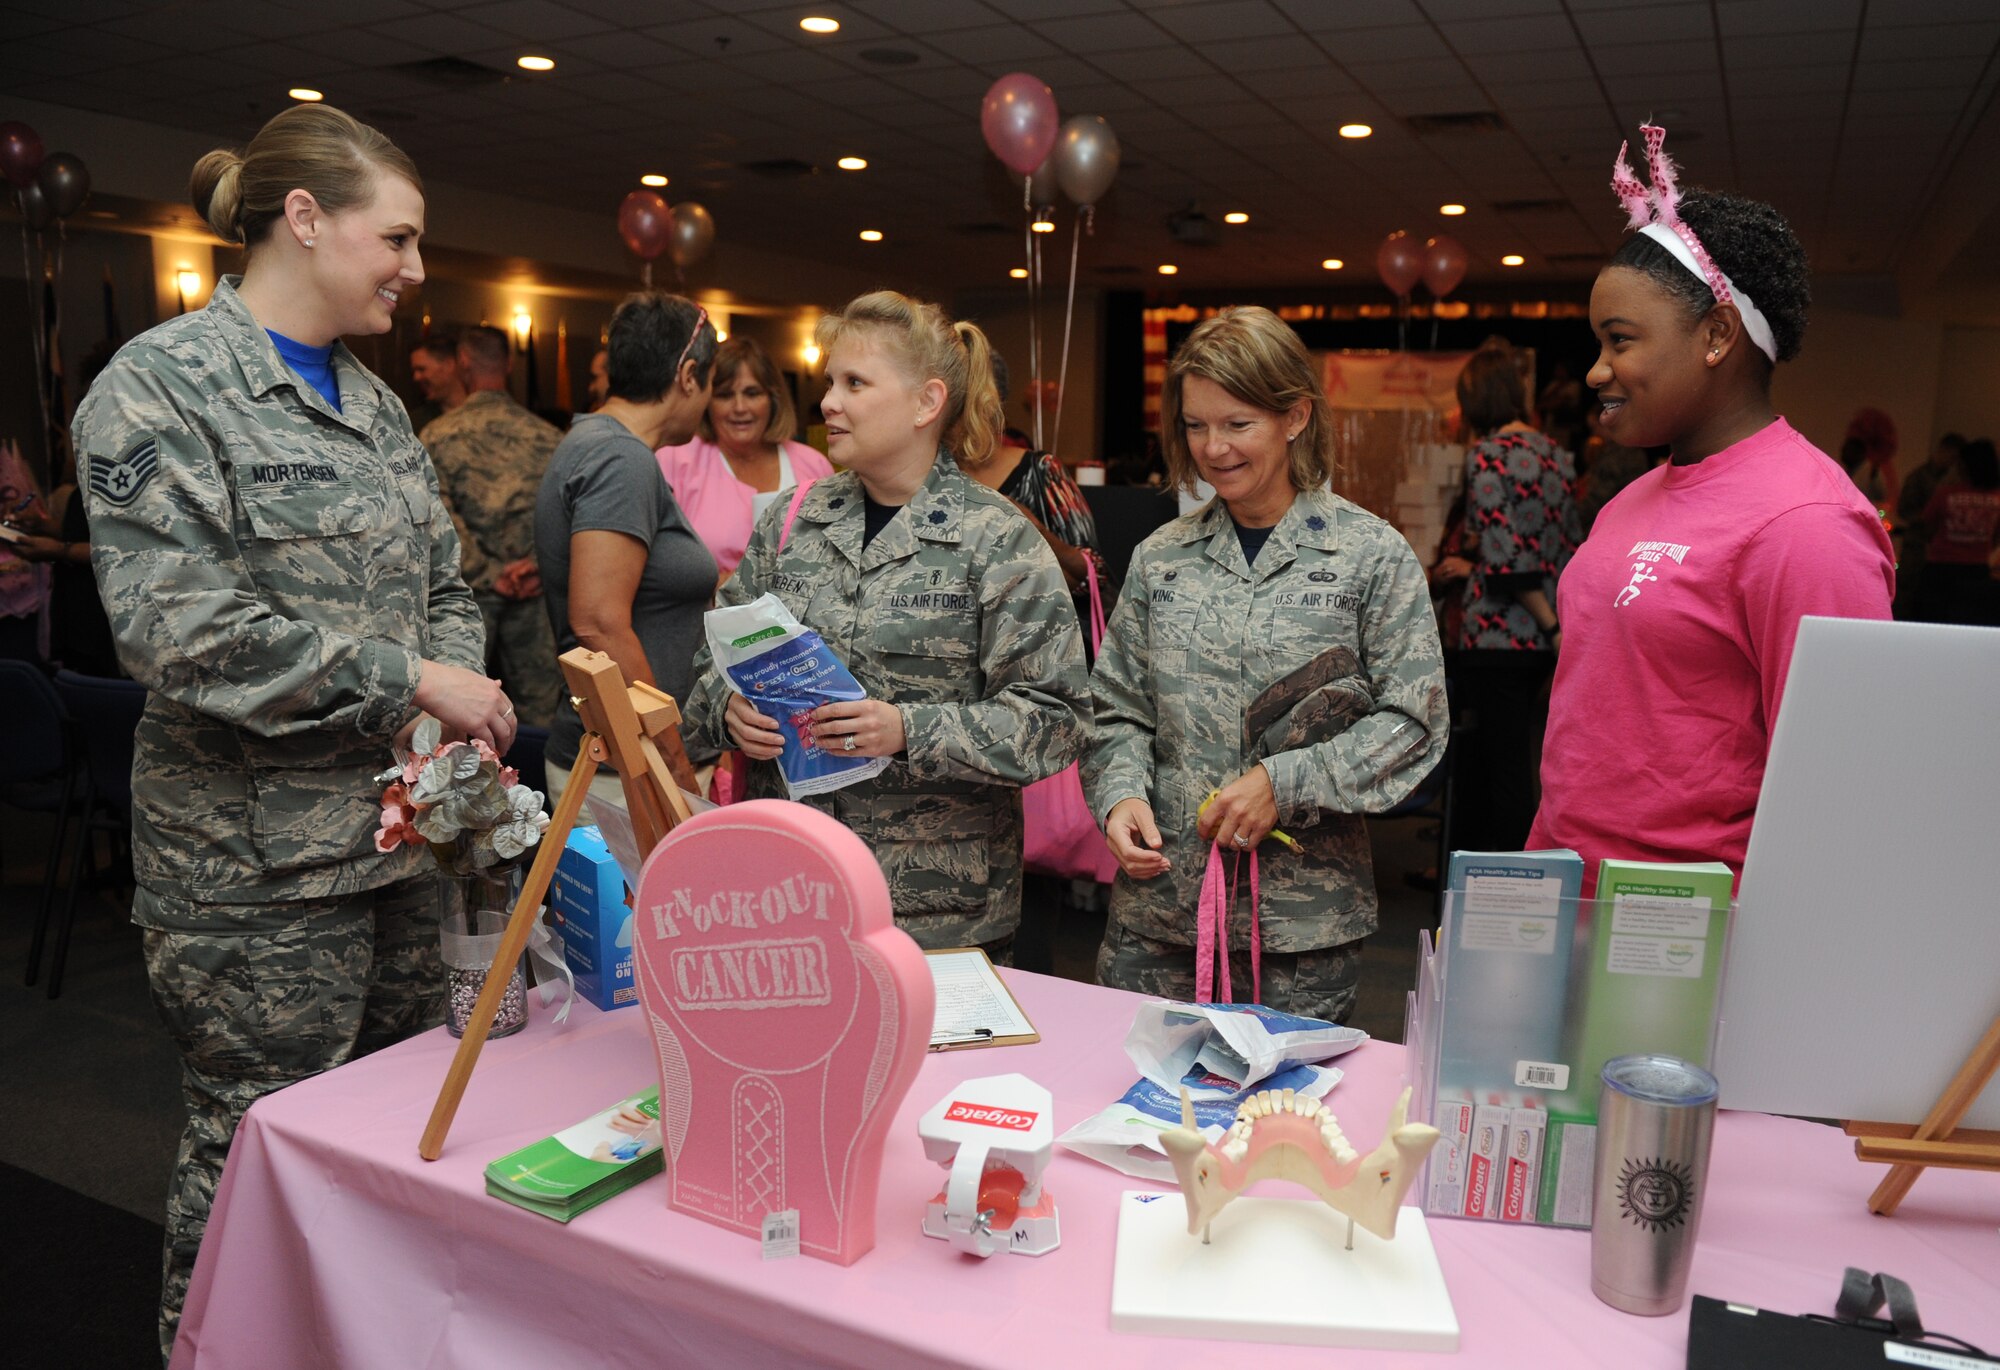 Keesler personnel visit the 81st Dental Squadron booth during the 5th Annual Mammothon Cancer Screening and Preventative Health Fair at the Don Wylie Auditorium Oct. 28, 2016, on Keesler Air Force Base, Miss. The walk-in event included screenings for multiple types of cancer and chronic diseases in honor of Breast Cancer Awareness Month. Flu shots were also provided upon request. (U.S. Air Force photo by Kemberly Groue/Released)